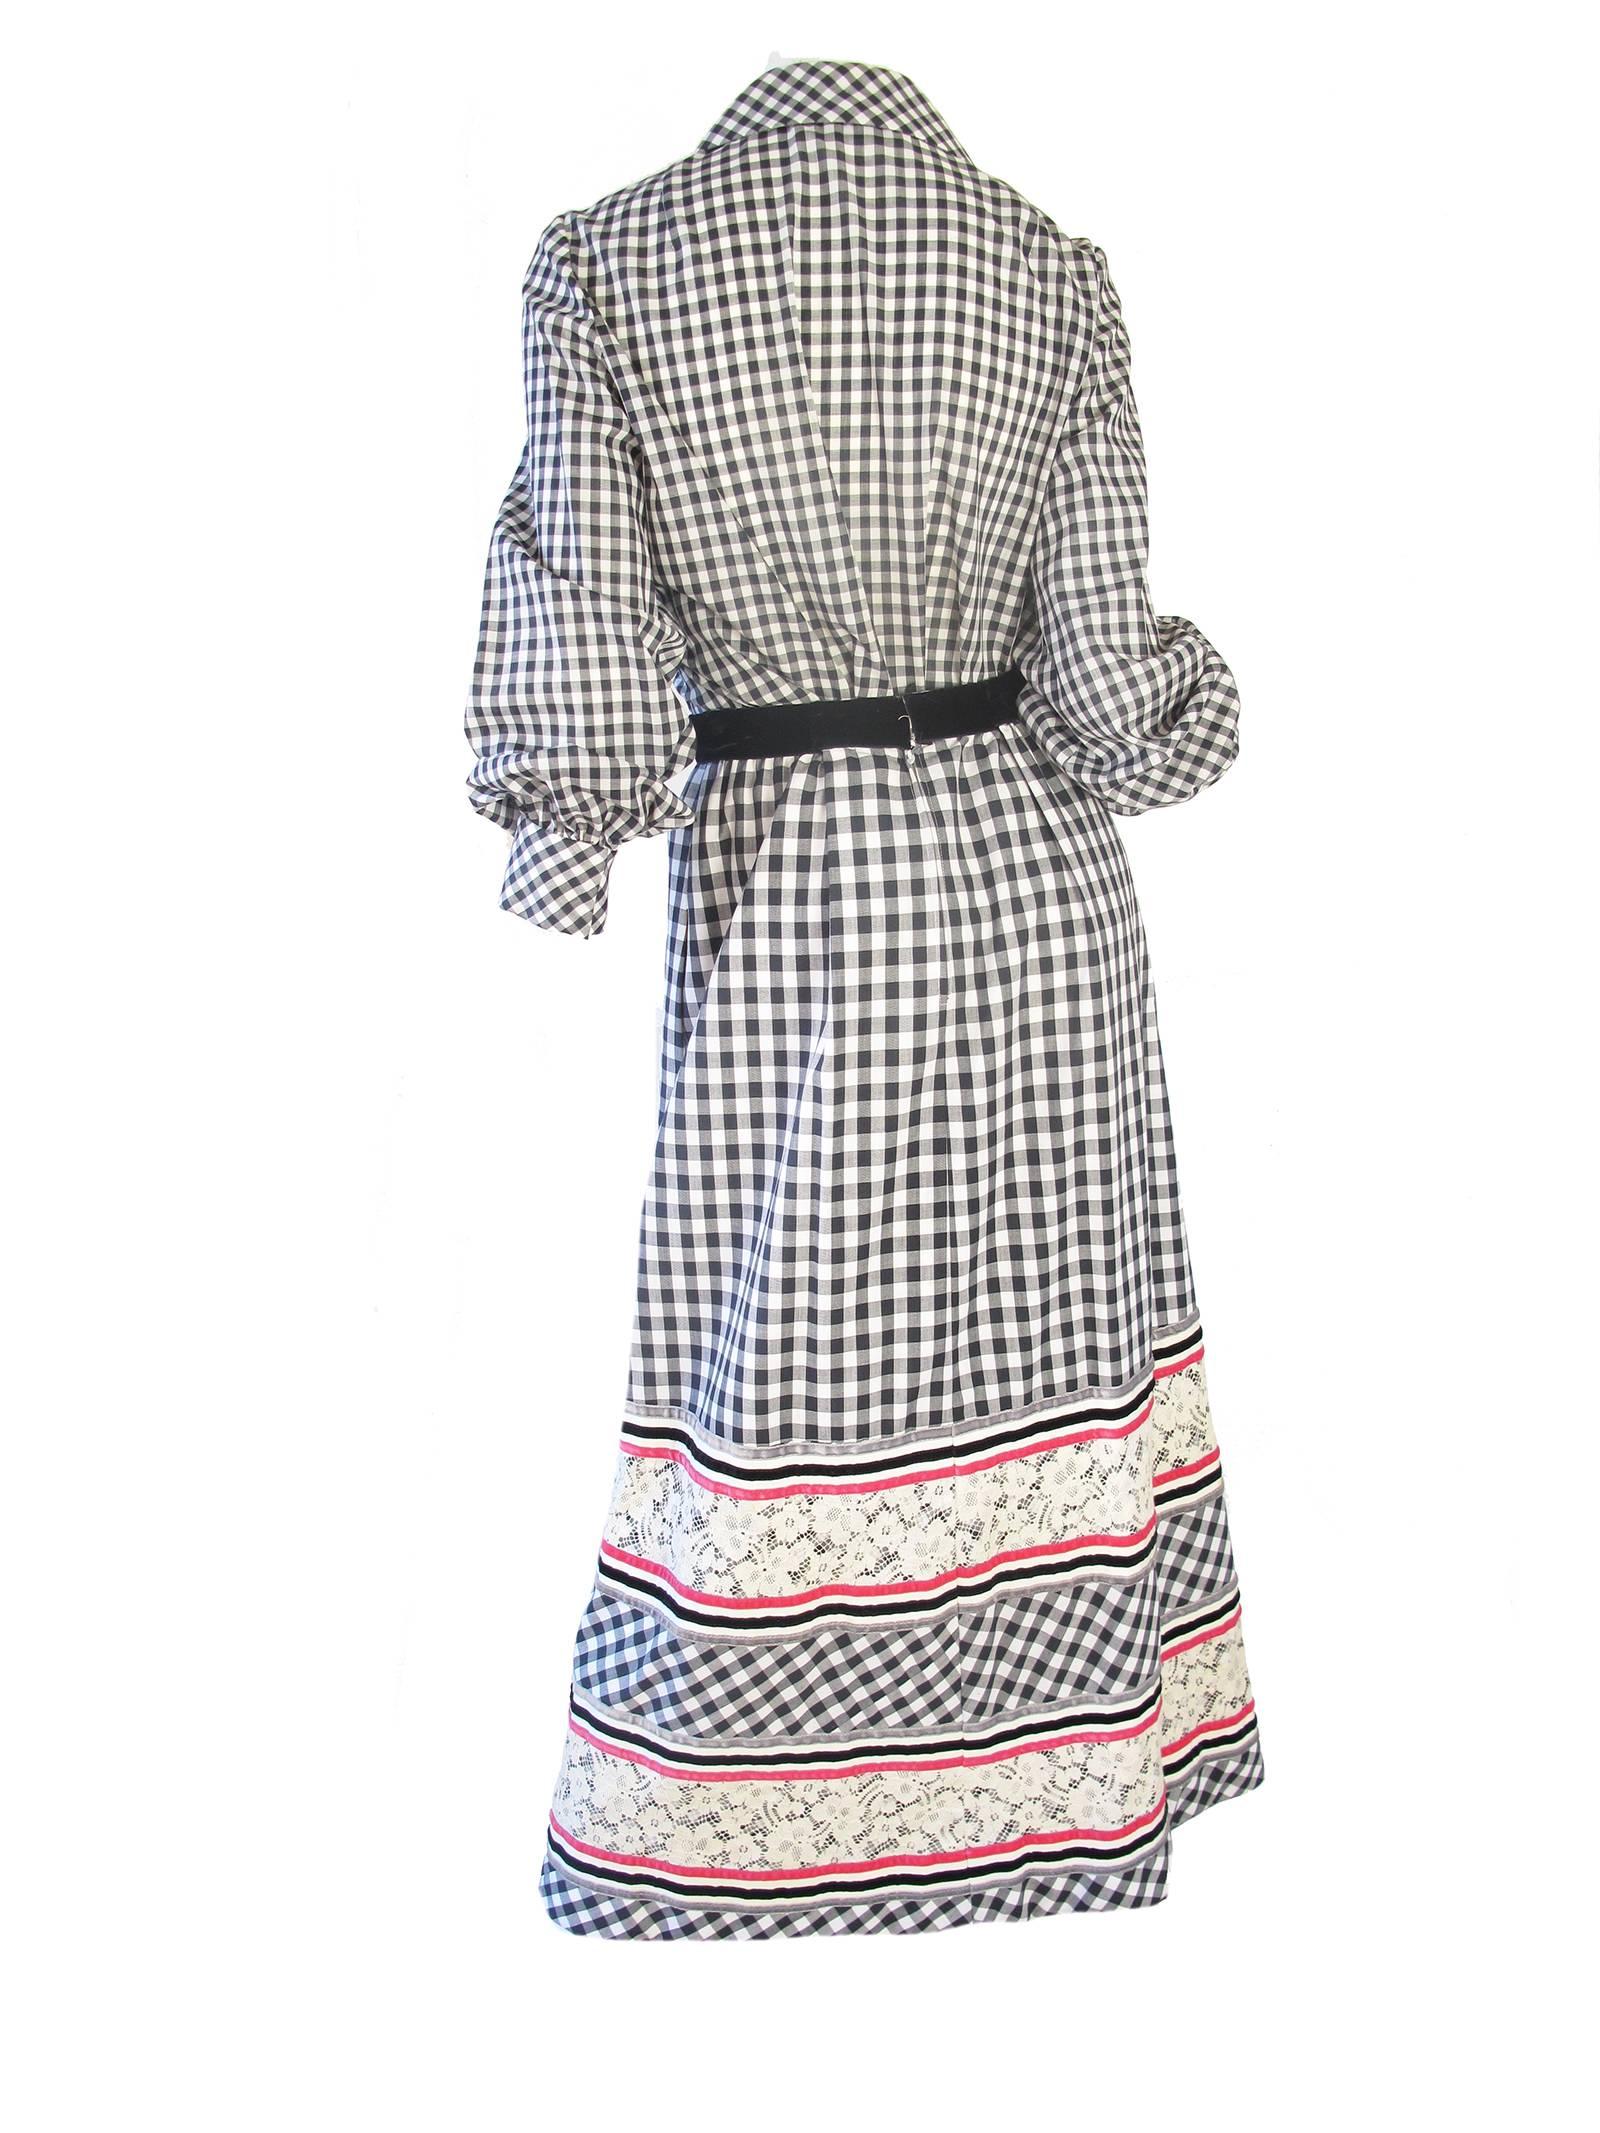 1970s Malcolm Starr black and white gingham cotton blouse and skirt with lace and velvet.  Condition: Very good, small spot on lace, see photos.  
Size 8 

We accept returns for refund, please see our terms.  We offer free ground shipping within the